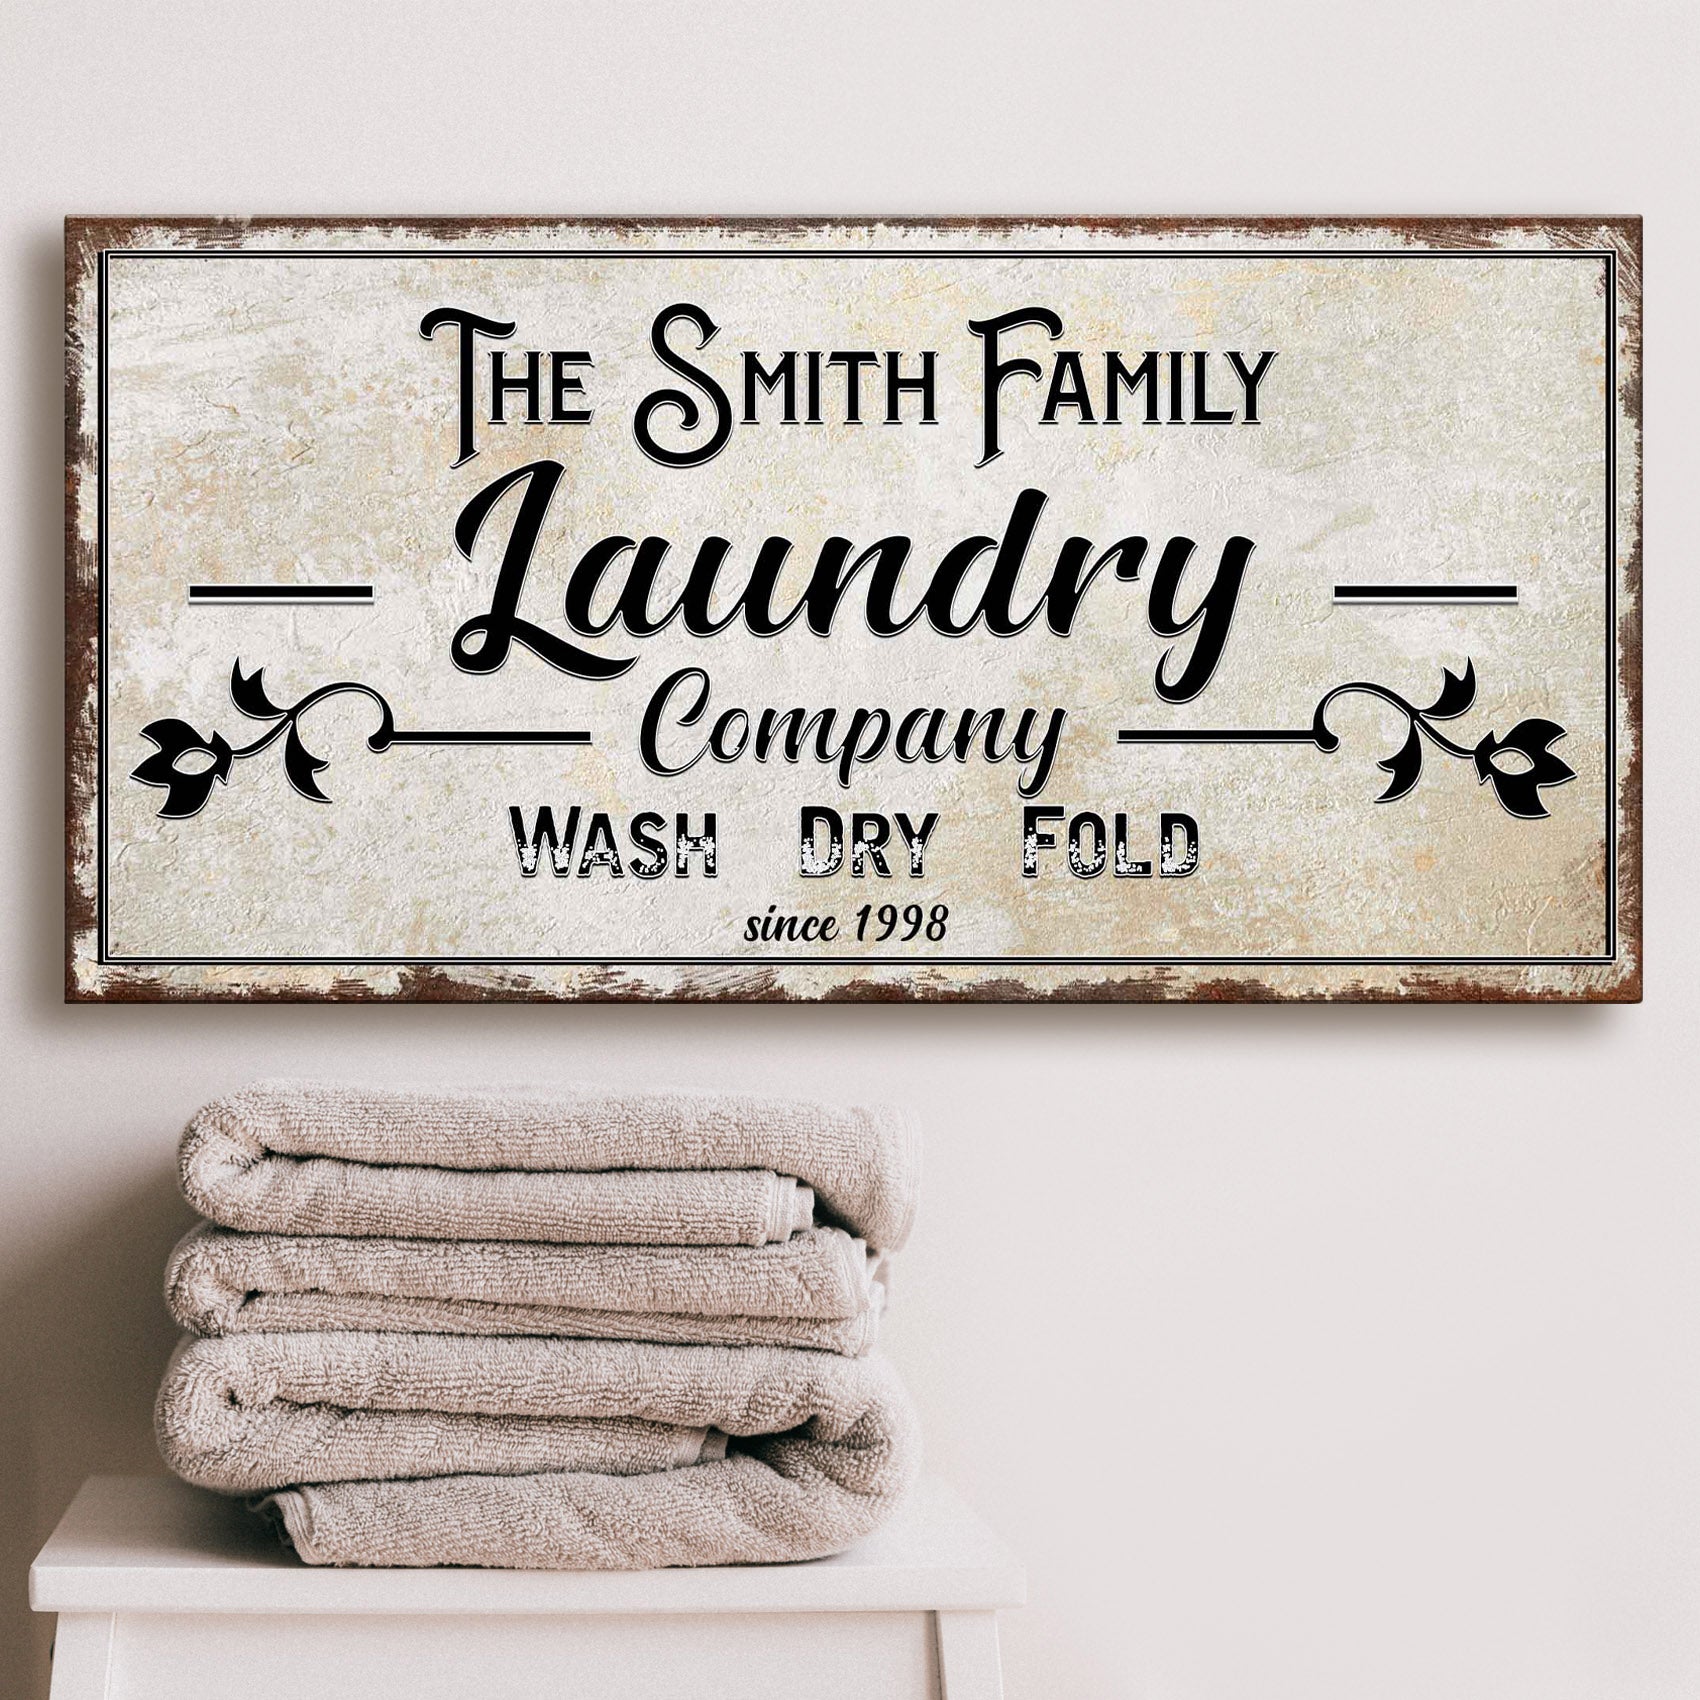 Family Laundry Company Sign - Image by Tailored Canvases